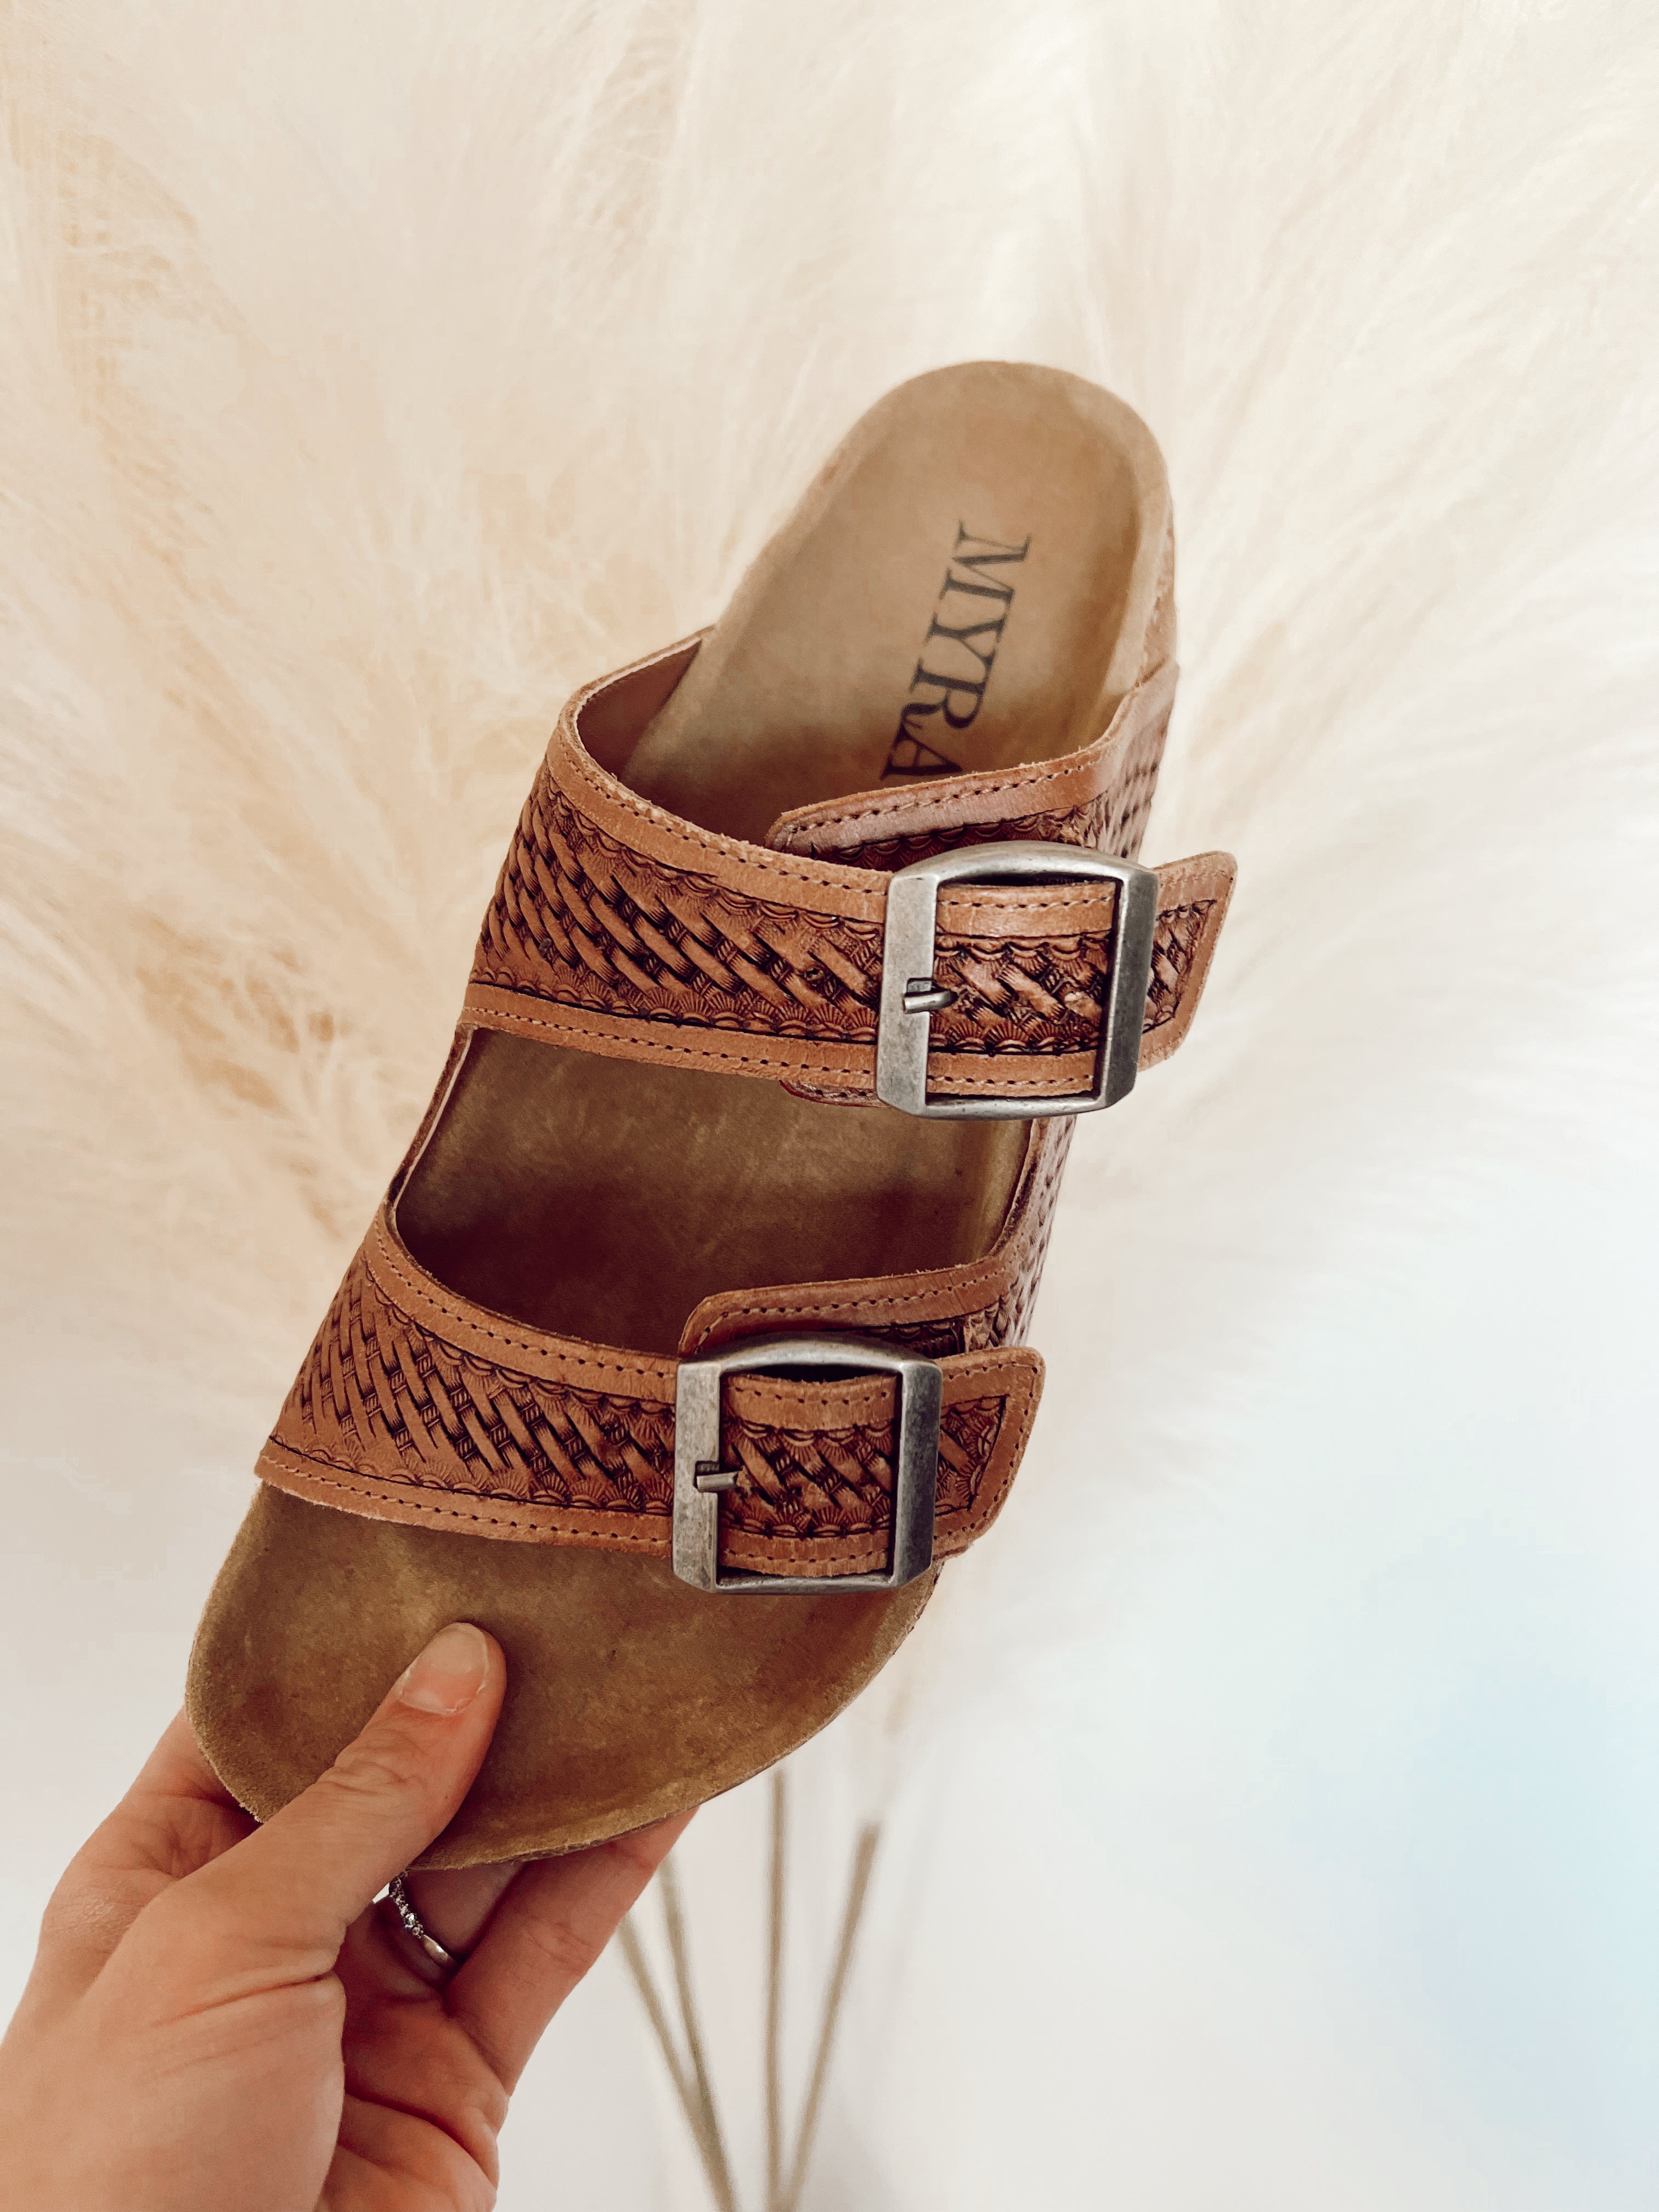 The Canyon Tooled Sandals